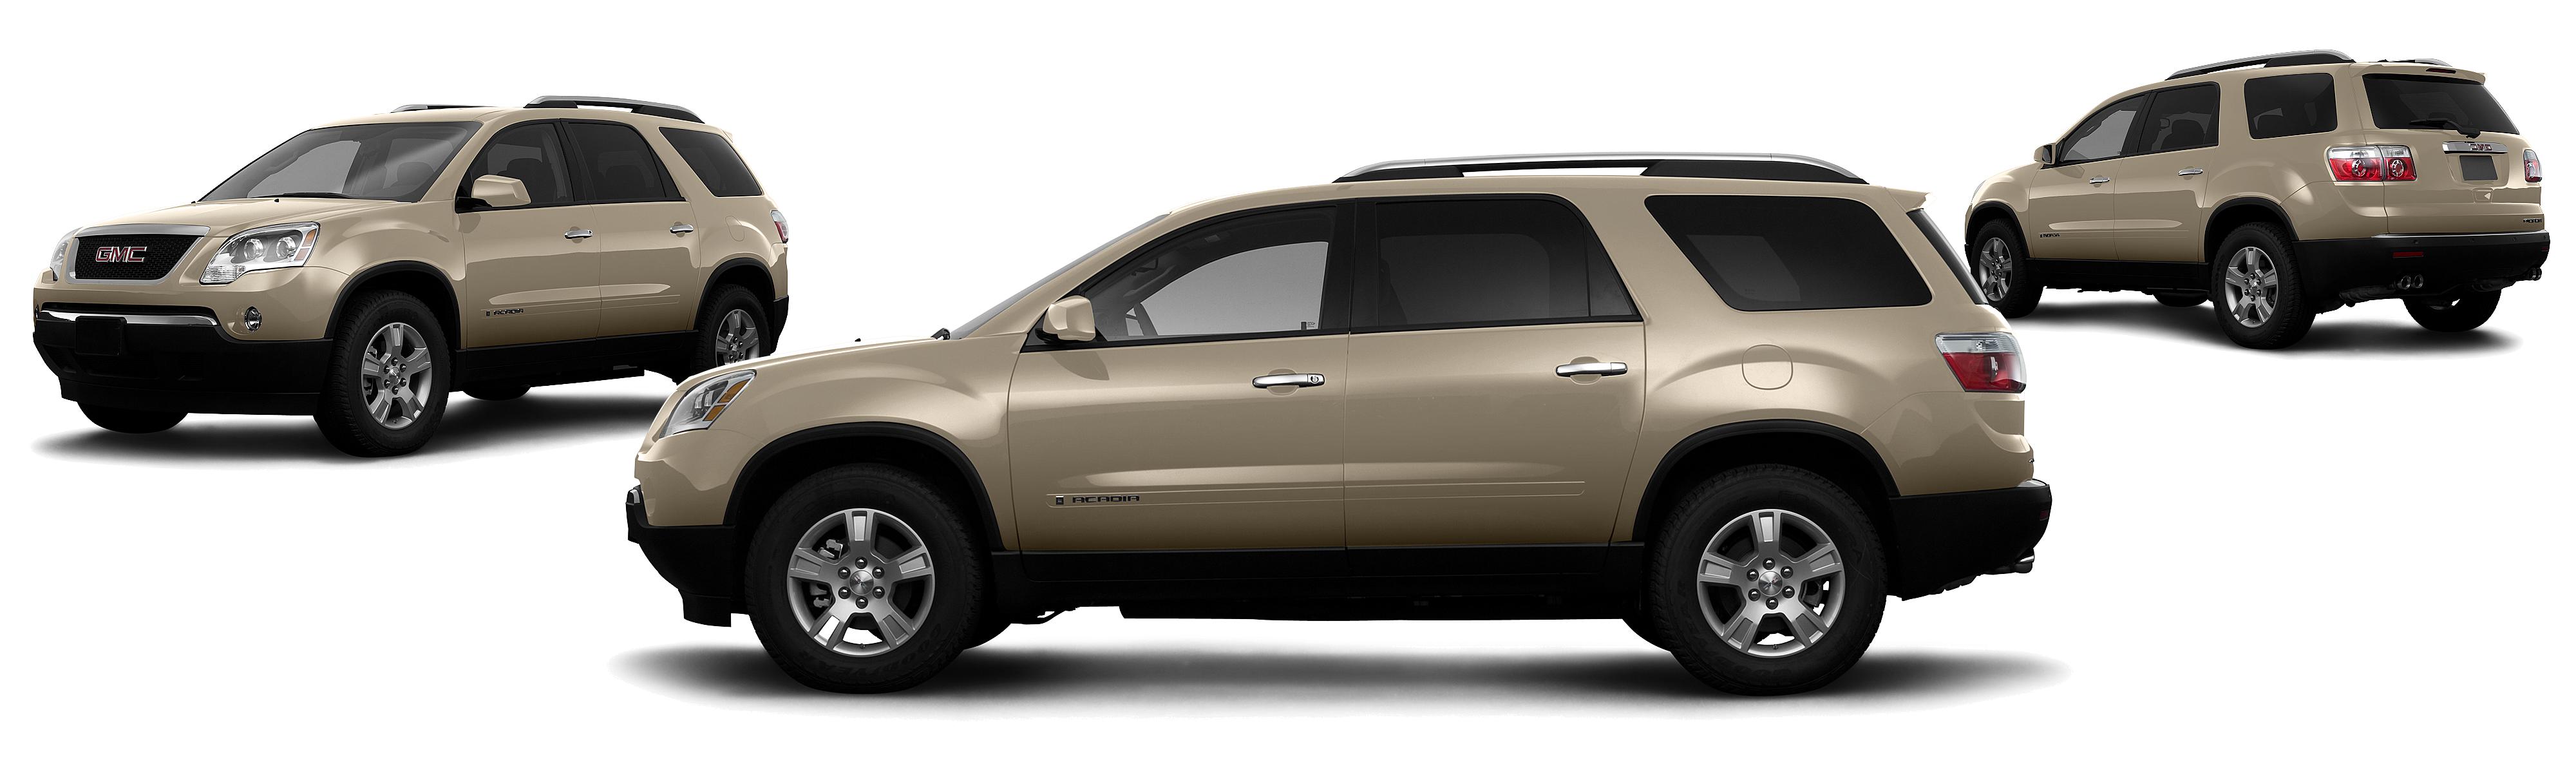 2008 GMC Acadia SLE-1 4dr SUV - Research - GrooveCar